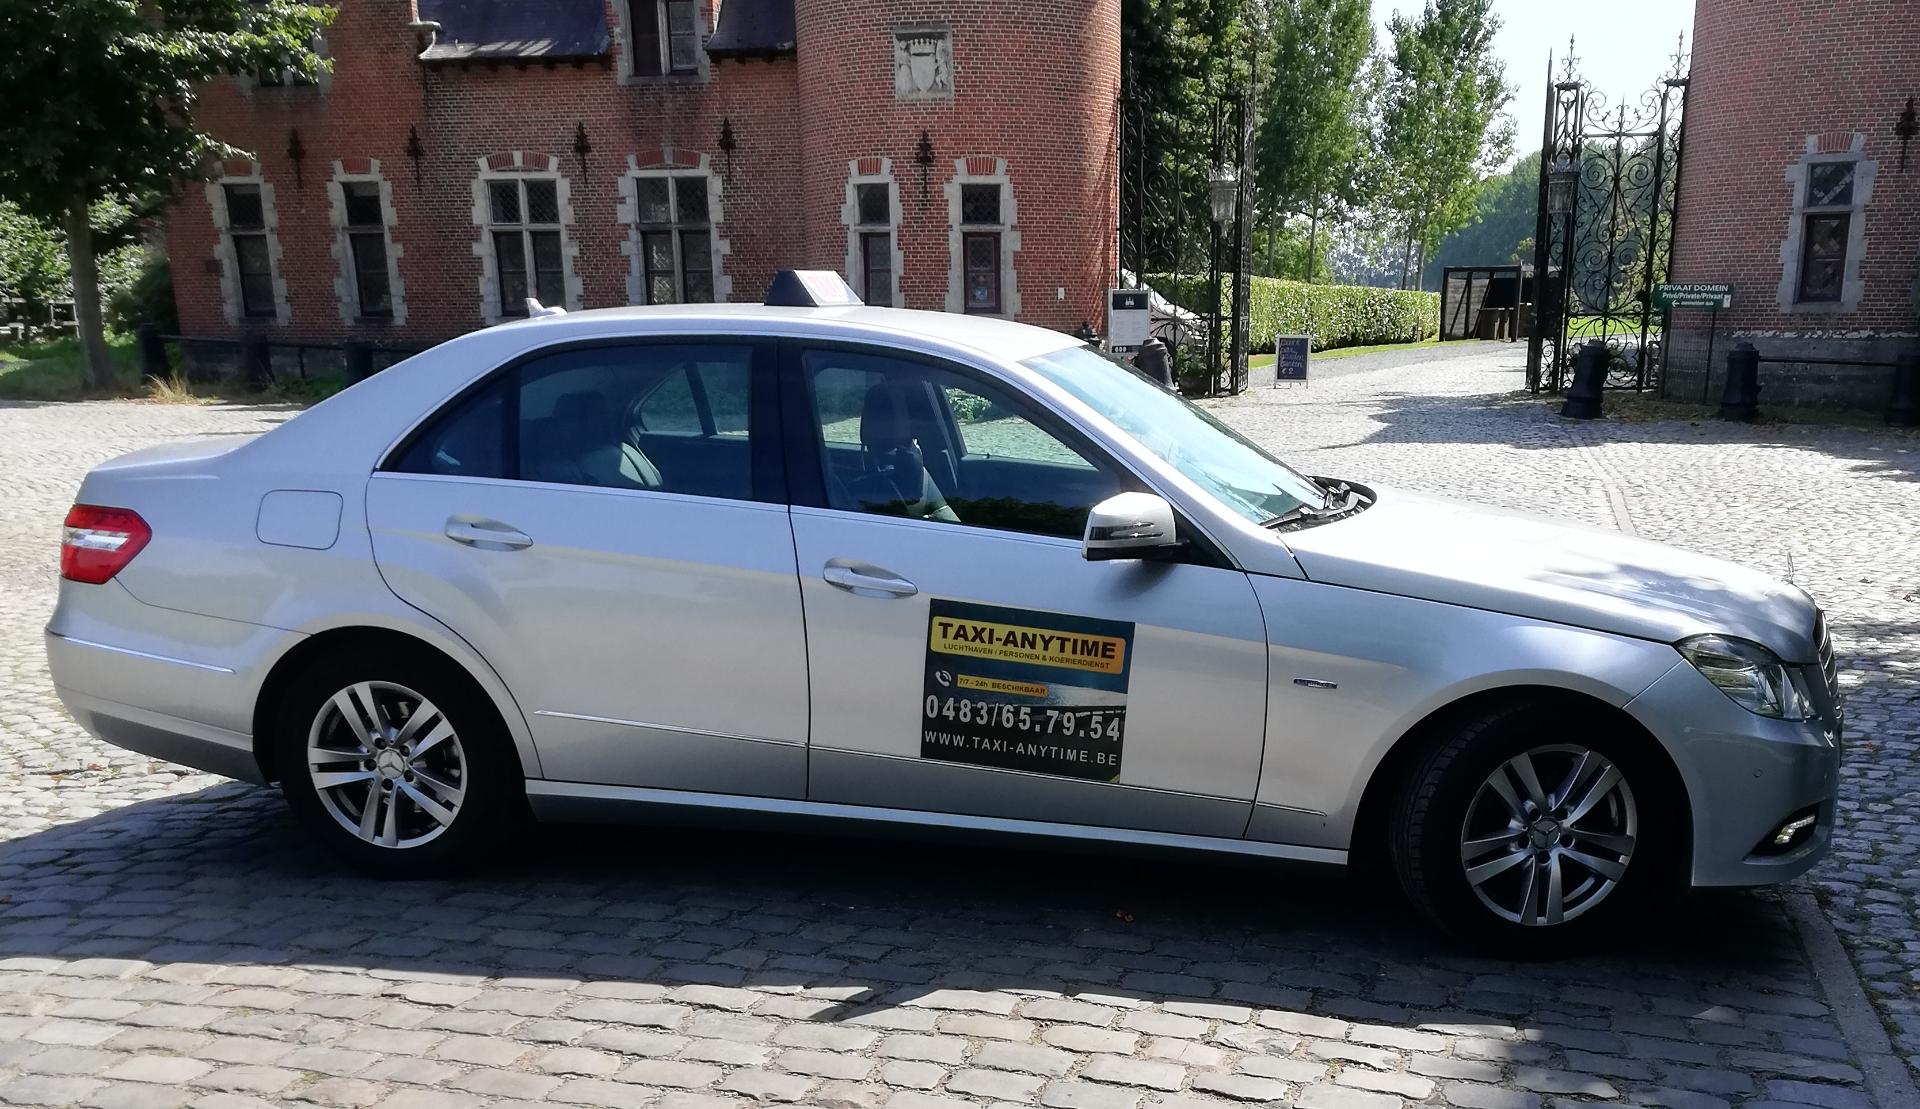 taxibedrijven Gent Taxi Anytime